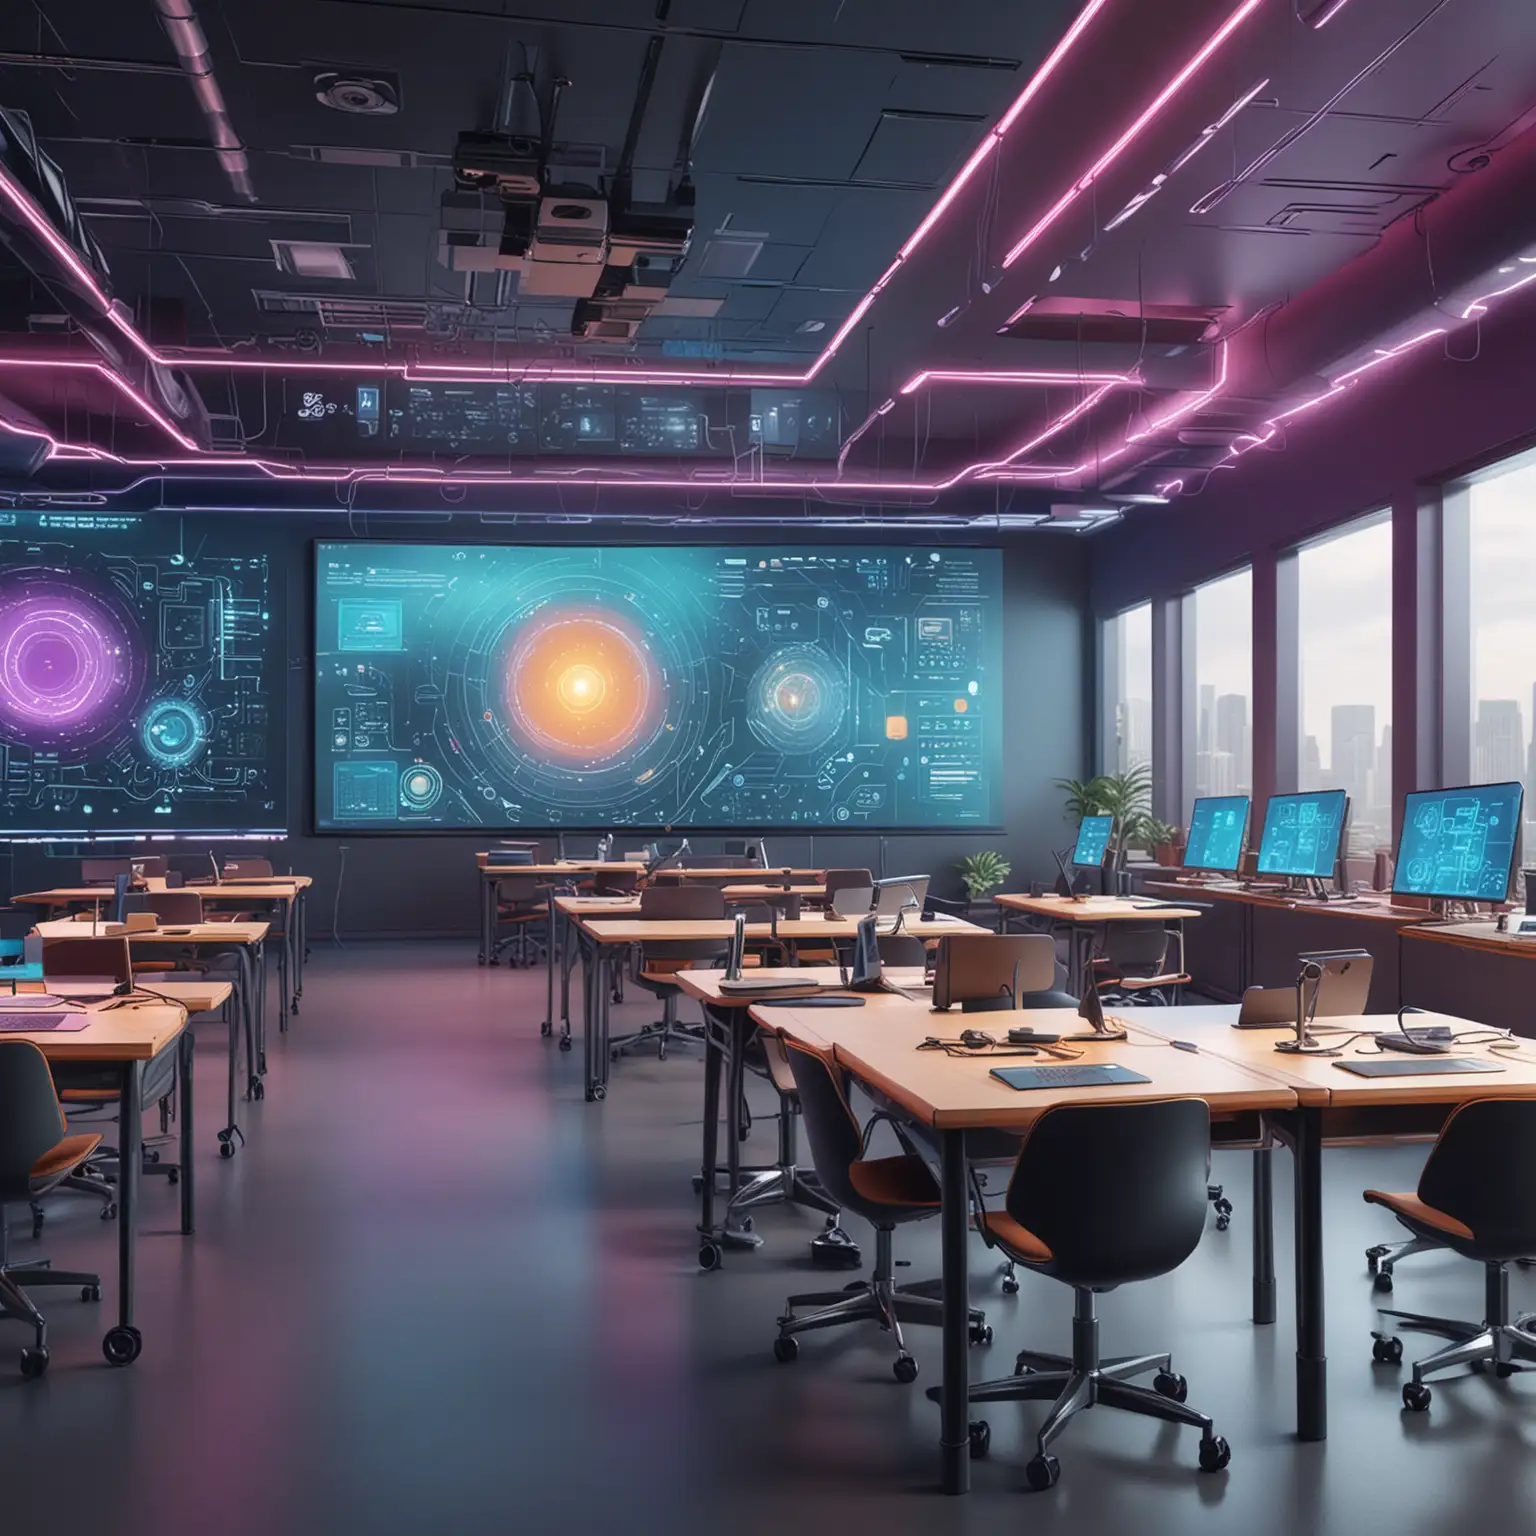 create a detailed image of a futuristic classroom wih elements of ai and innovation. create bold colors and a mood of curiosity
